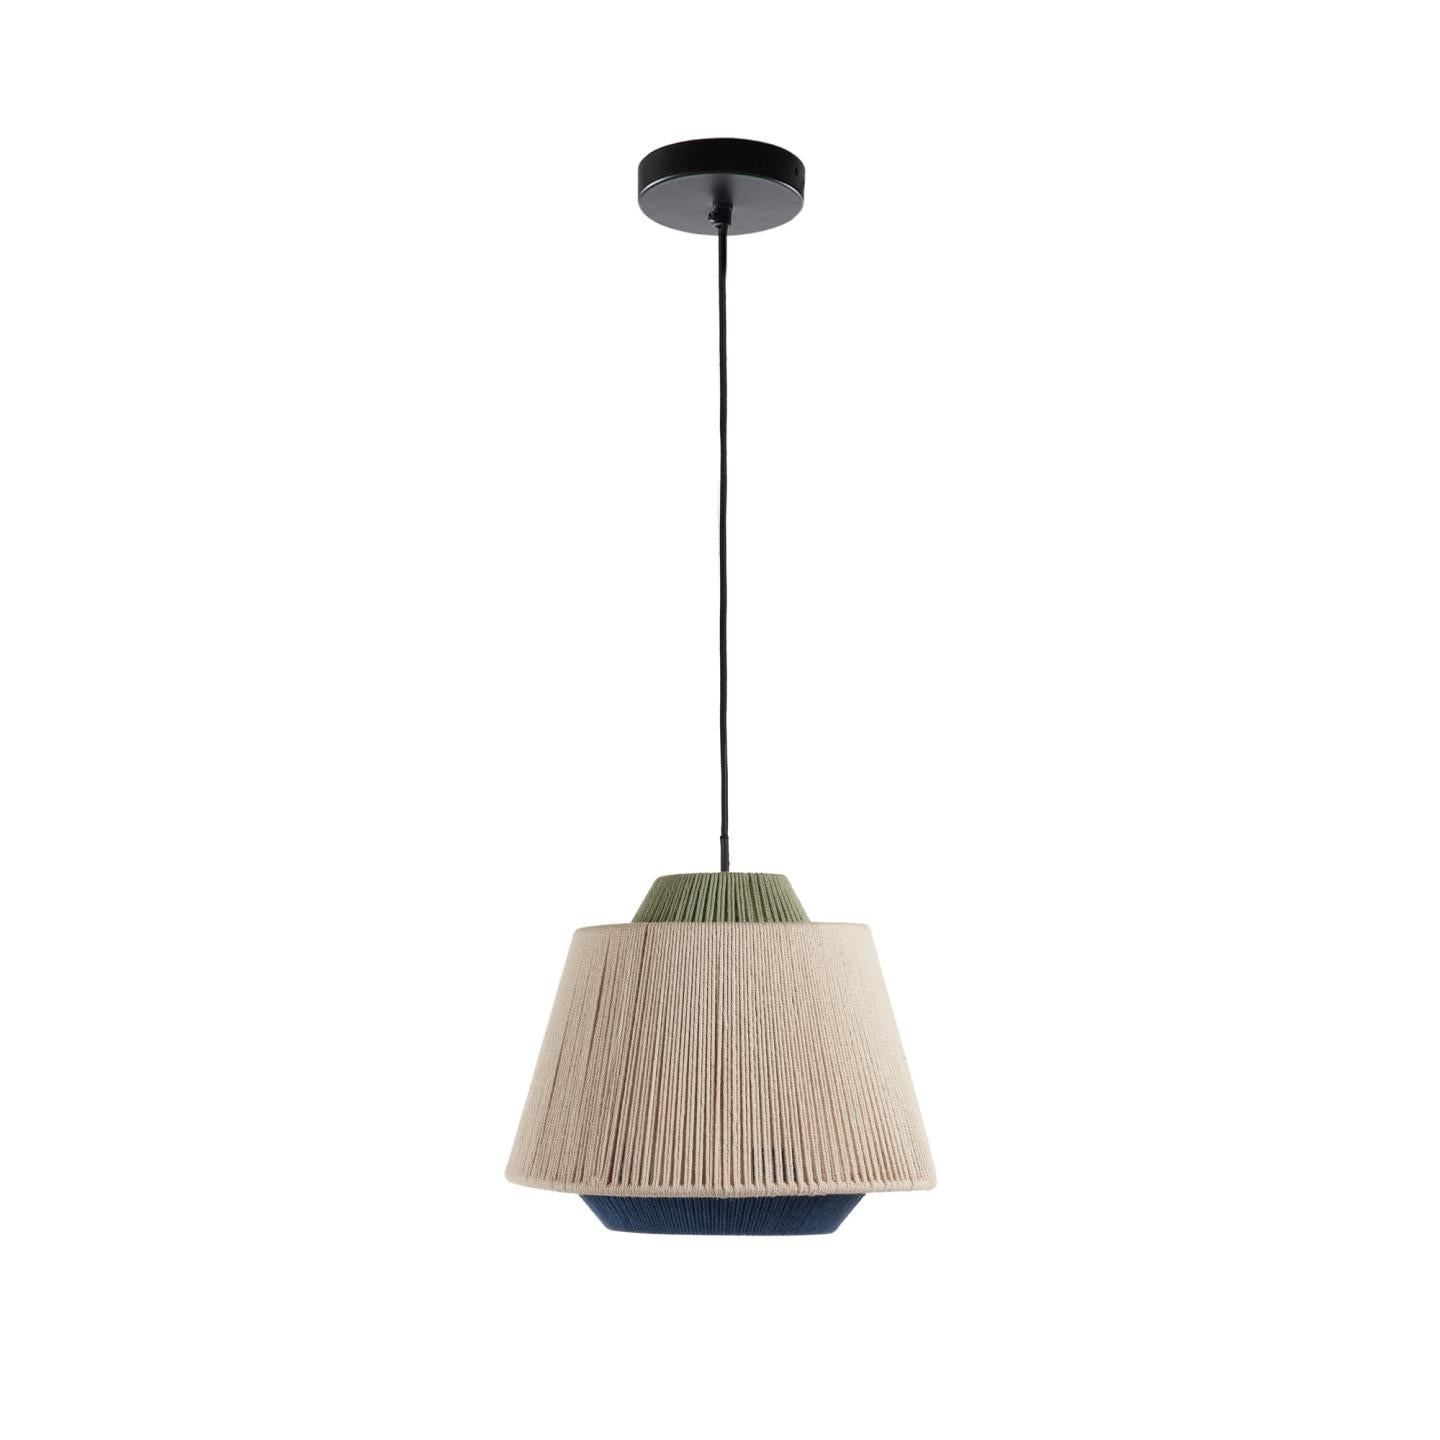 Yuvia cotton ceiling lamp with a beige and blue finish